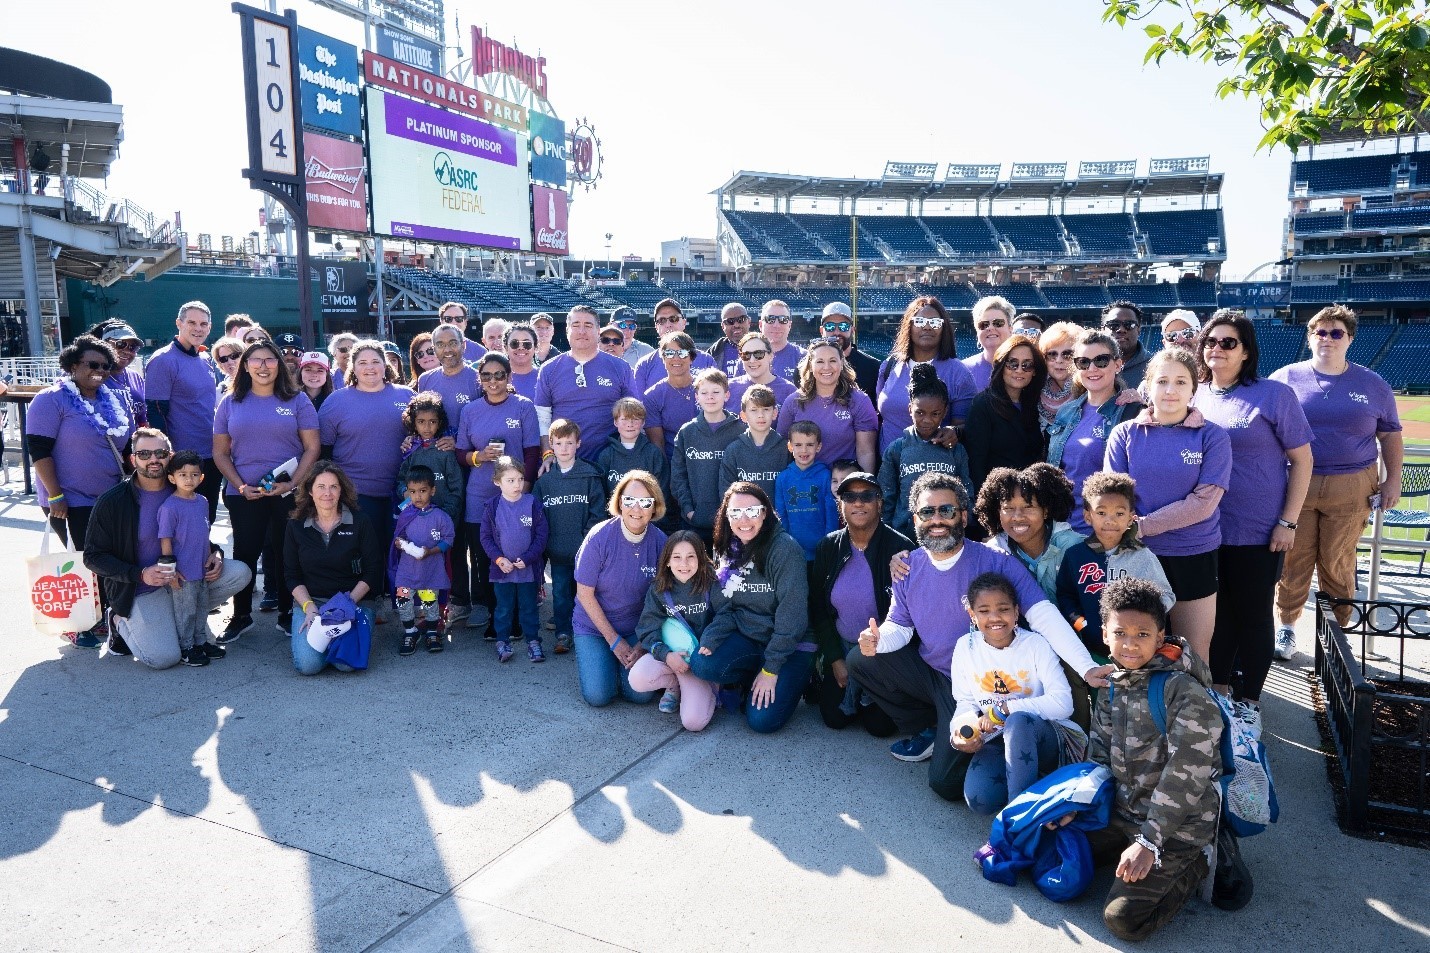 
Employees support March of Dimes event in Washington, D.C. as part of an employee engagement and giving campaign. 

